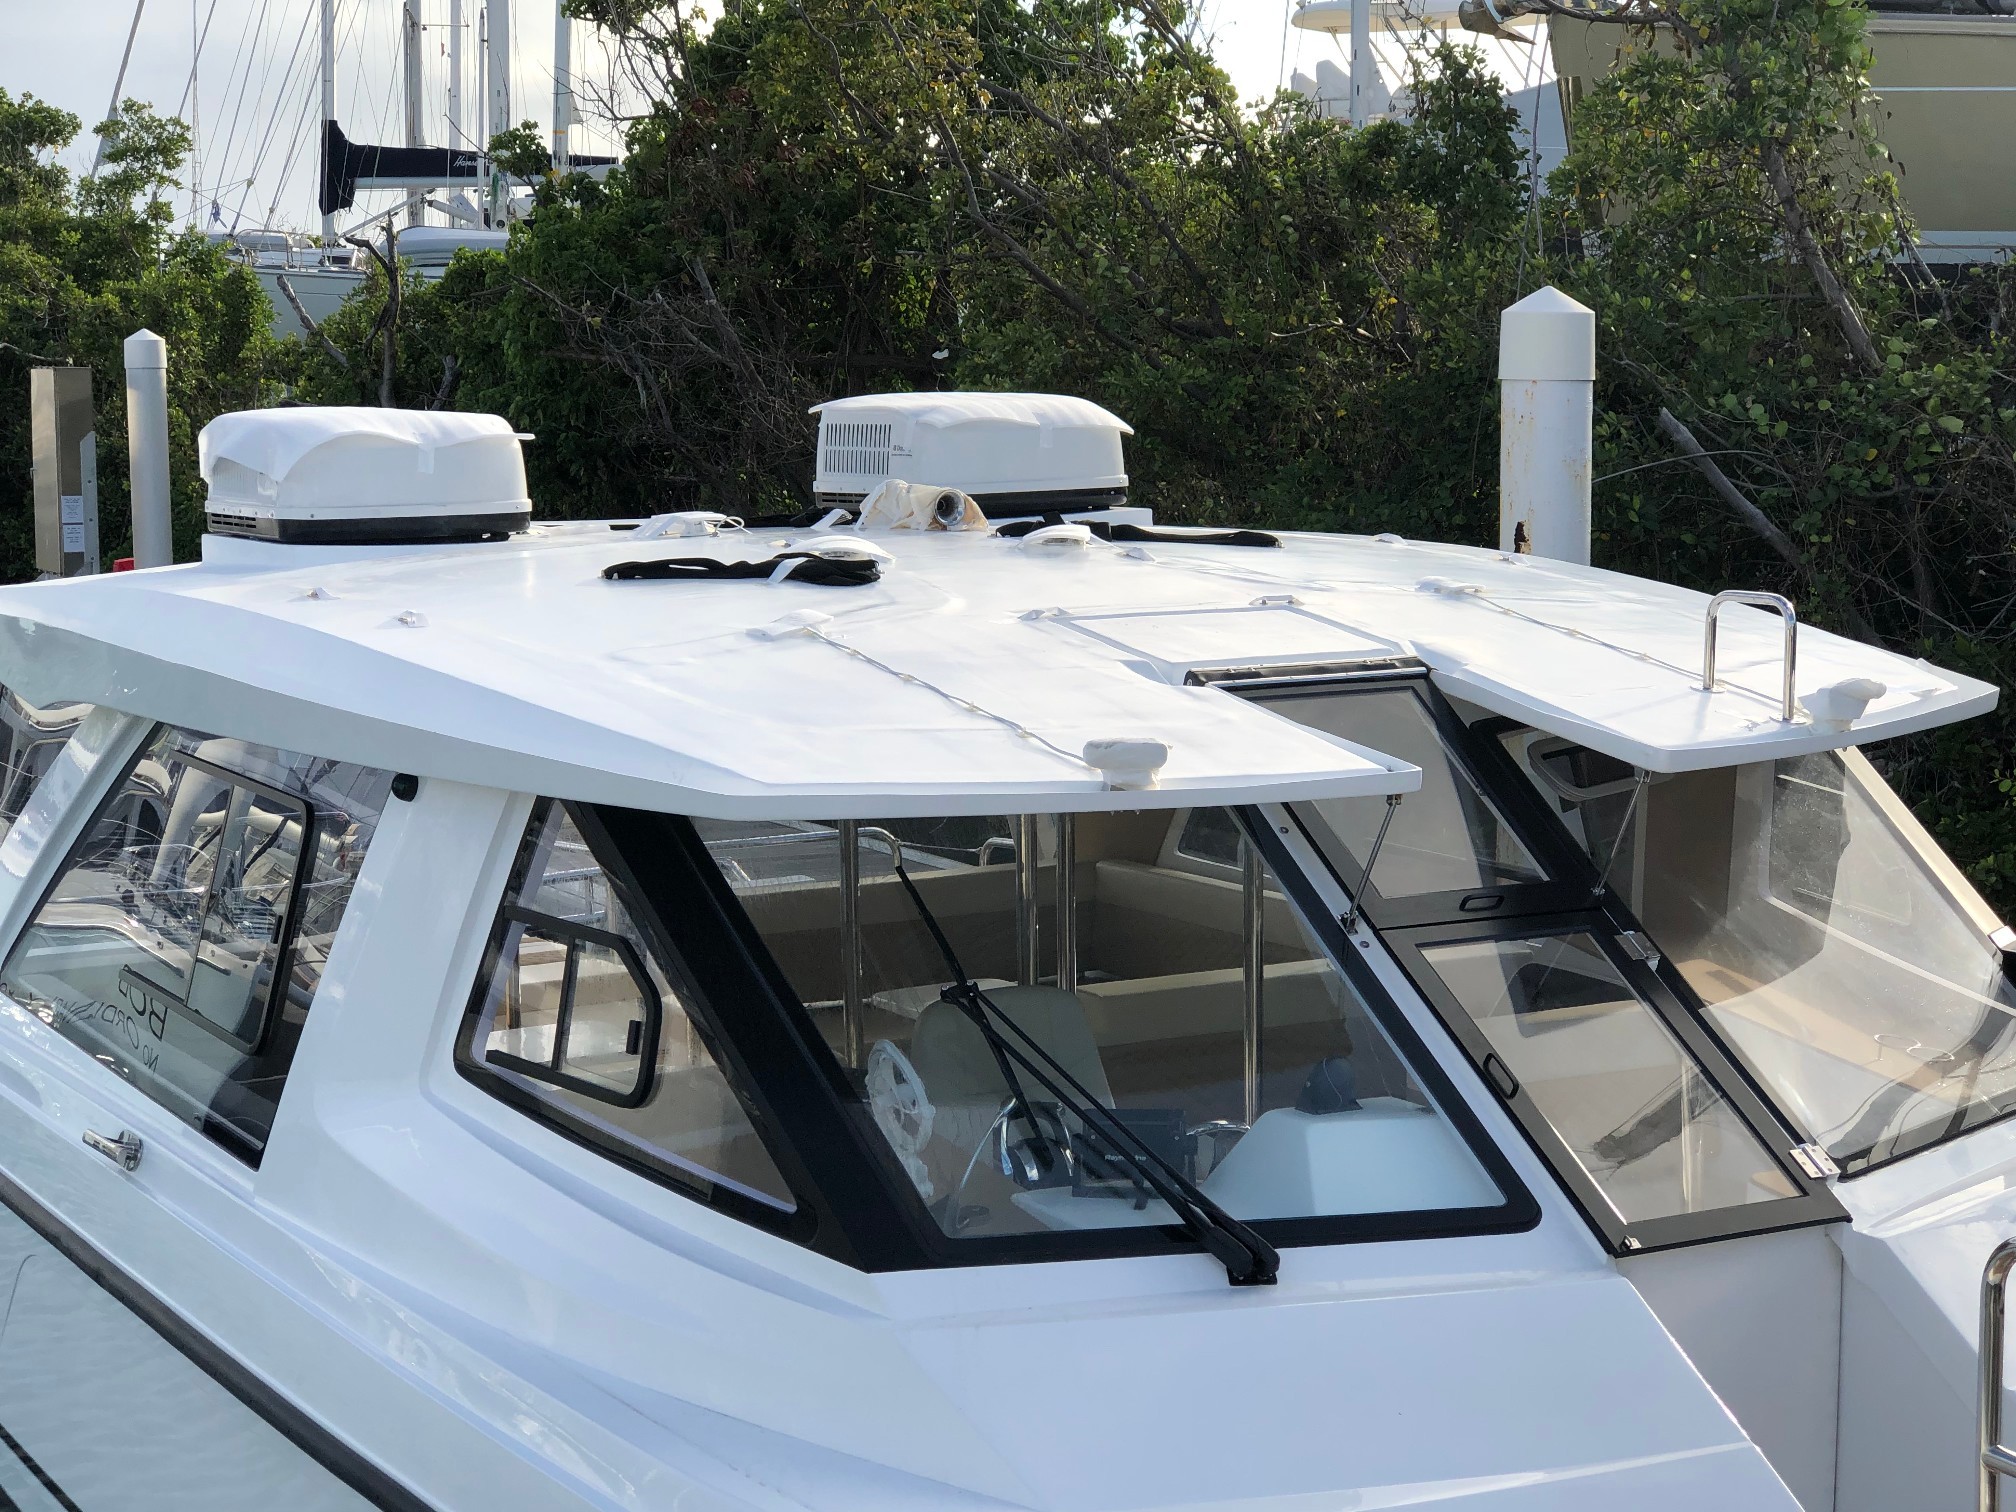 New Power Catamaran for Sale 2020 AQUILA 36 EXCURSION Additional Information